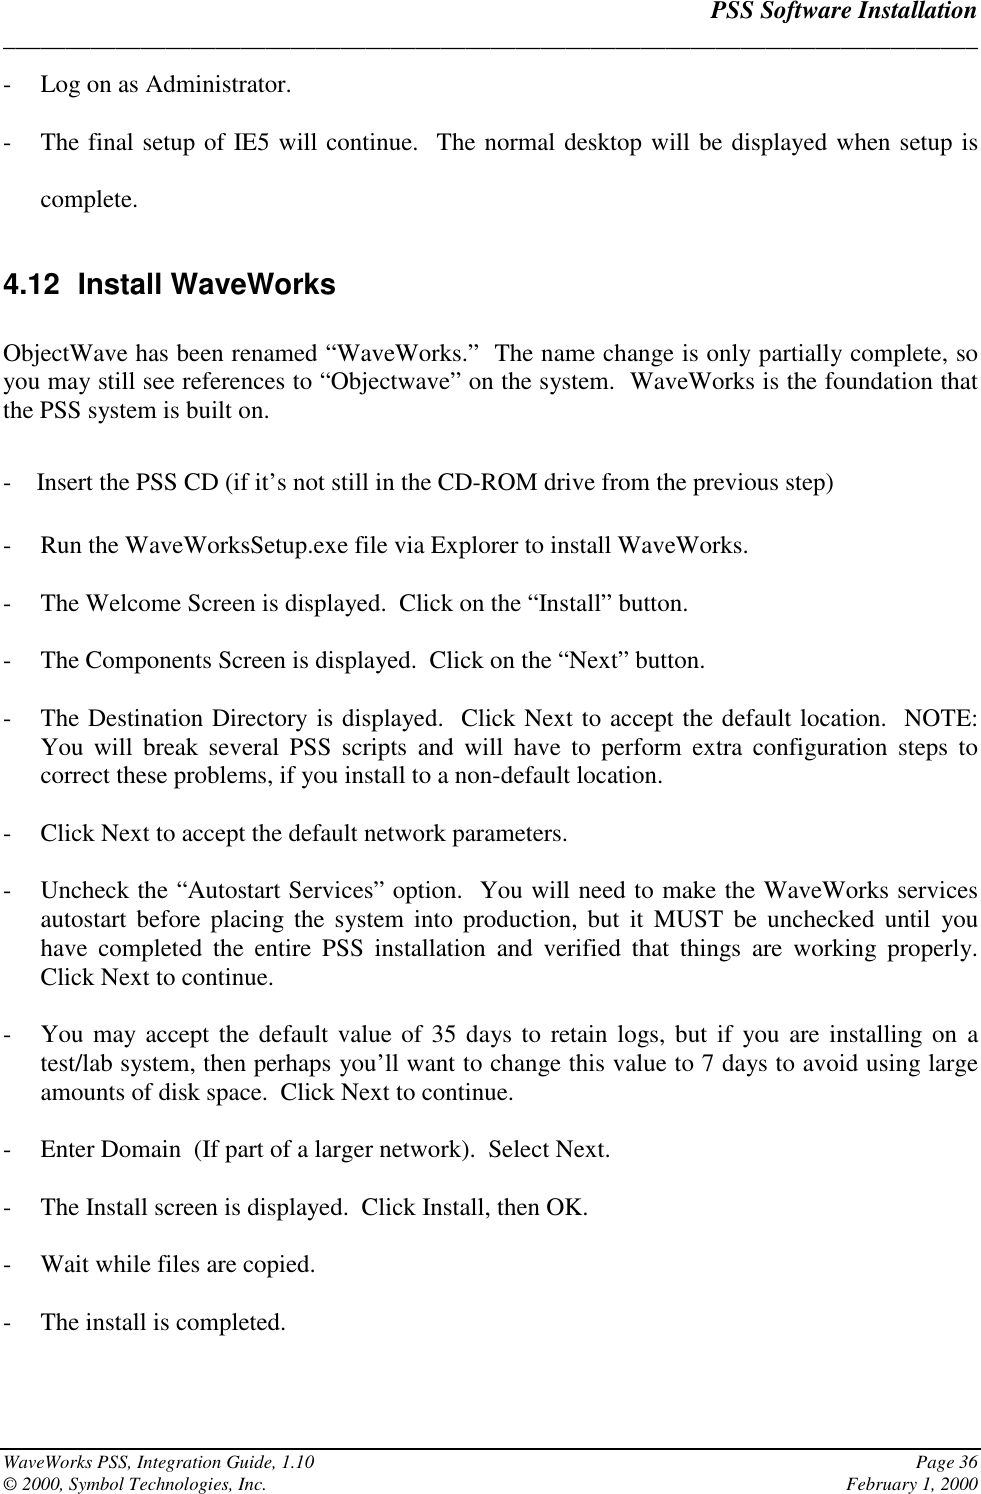 PSS Software Installation______________________________________________________________________________WaveWorks PSS, Integration Guide, 1.10 Page 36© 2000, Symbol Technologies, Inc. February 1, 2000- Log on as Administrator.- The final setup of IE5 will continue.  The normal desktop will be displayed when setup iscomplete.4.12 Install WaveWorksObjectWave has been renamed “WaveWorks.”  The name change is only partially complete, soyou may still see references to “Objectwave” on the system.  WaveWorks is the foundation thatthe PSS system is built on.-    Insert the PSS CD (if it’s not still in the CD-ROM drive from the previous step)- Run the WaveWorksSetup.exe file via Explorer to install WaveWorks.- The Welcome Screen is displayed.  Click on the “Install” button.- The Components Screen is displayed.  Click on the “Next” button.- The Destination Directory is displayed.  Click Next to accept the default location.  NOTE:You will break several PSS scripts and will have to perform extra configuration steps tocorrect these problems, if you install to a non-default location.- Click Next to accept the default network parameters.- Uncheck the “Autostart Services” option.  You will need to make the WaveWorks servicesautostart before placing the system into production, but it MUST be unchecked until youhave completed the entire PSS installation and verified that things are working properly.Click Next to continue.- You may accept the default value of 35 days to retain logs, but if you are installing on atest/lab system, then perhaps you’ll want to change this value to 7 days to avoid using largeamounts of disk space.  Click Next to continue.- Enter Domain  (If part of a larger network).  Select Next.- The Install screen is displayed.  Click Install, then OK.- Wait while files are copied.- The install is completed.